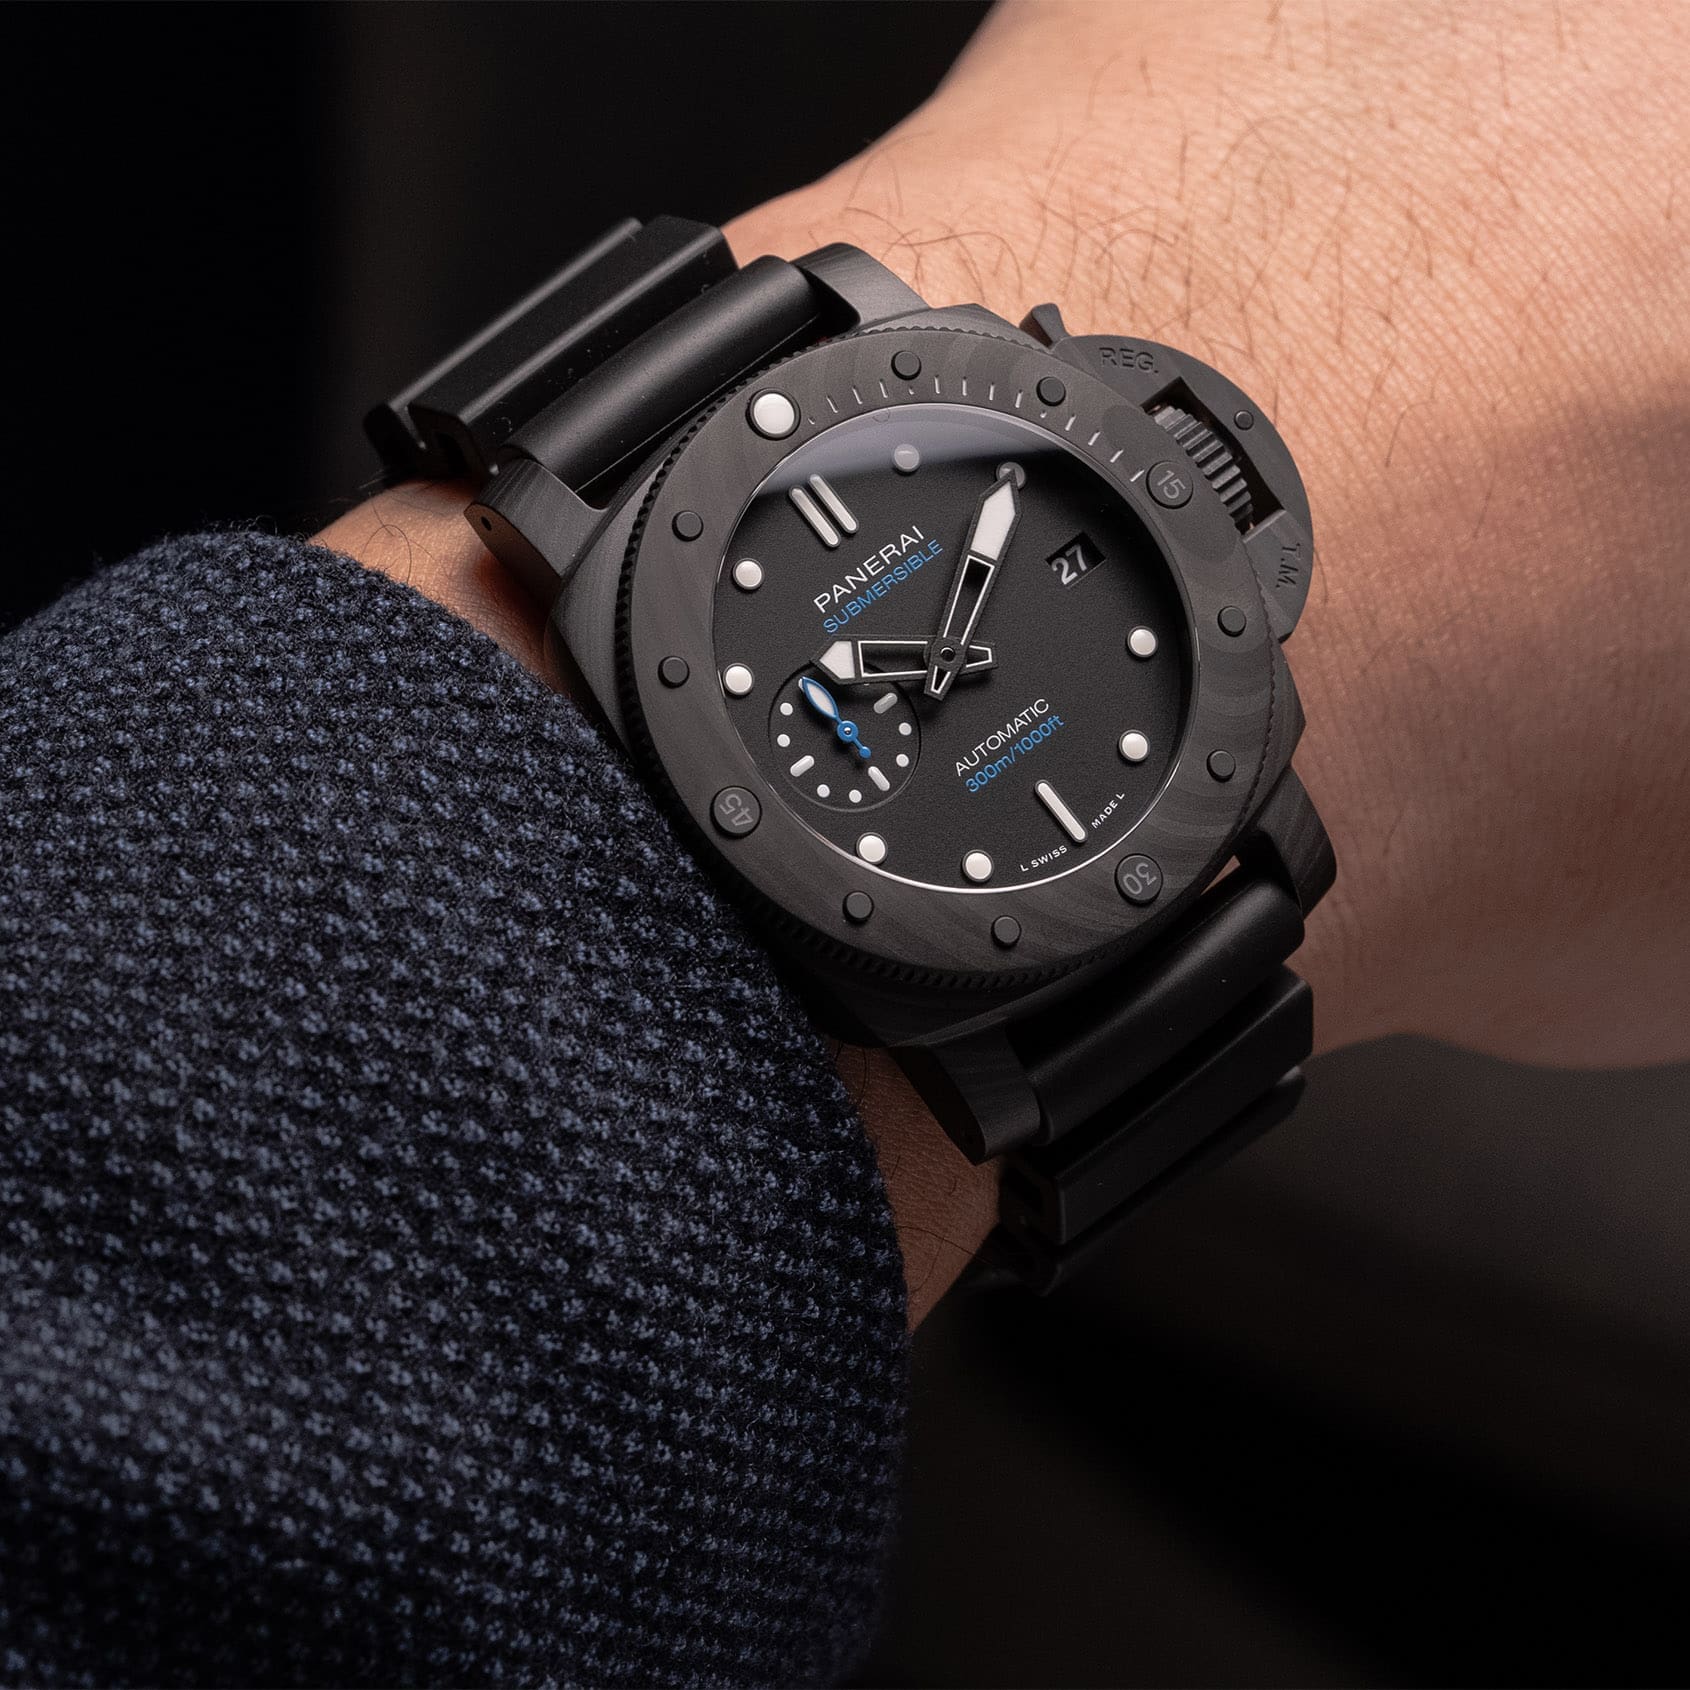 HANDS-ON: The Panerai Submersible Carbotech and Blu Abisso deliver brooding looks and high-tech attitude